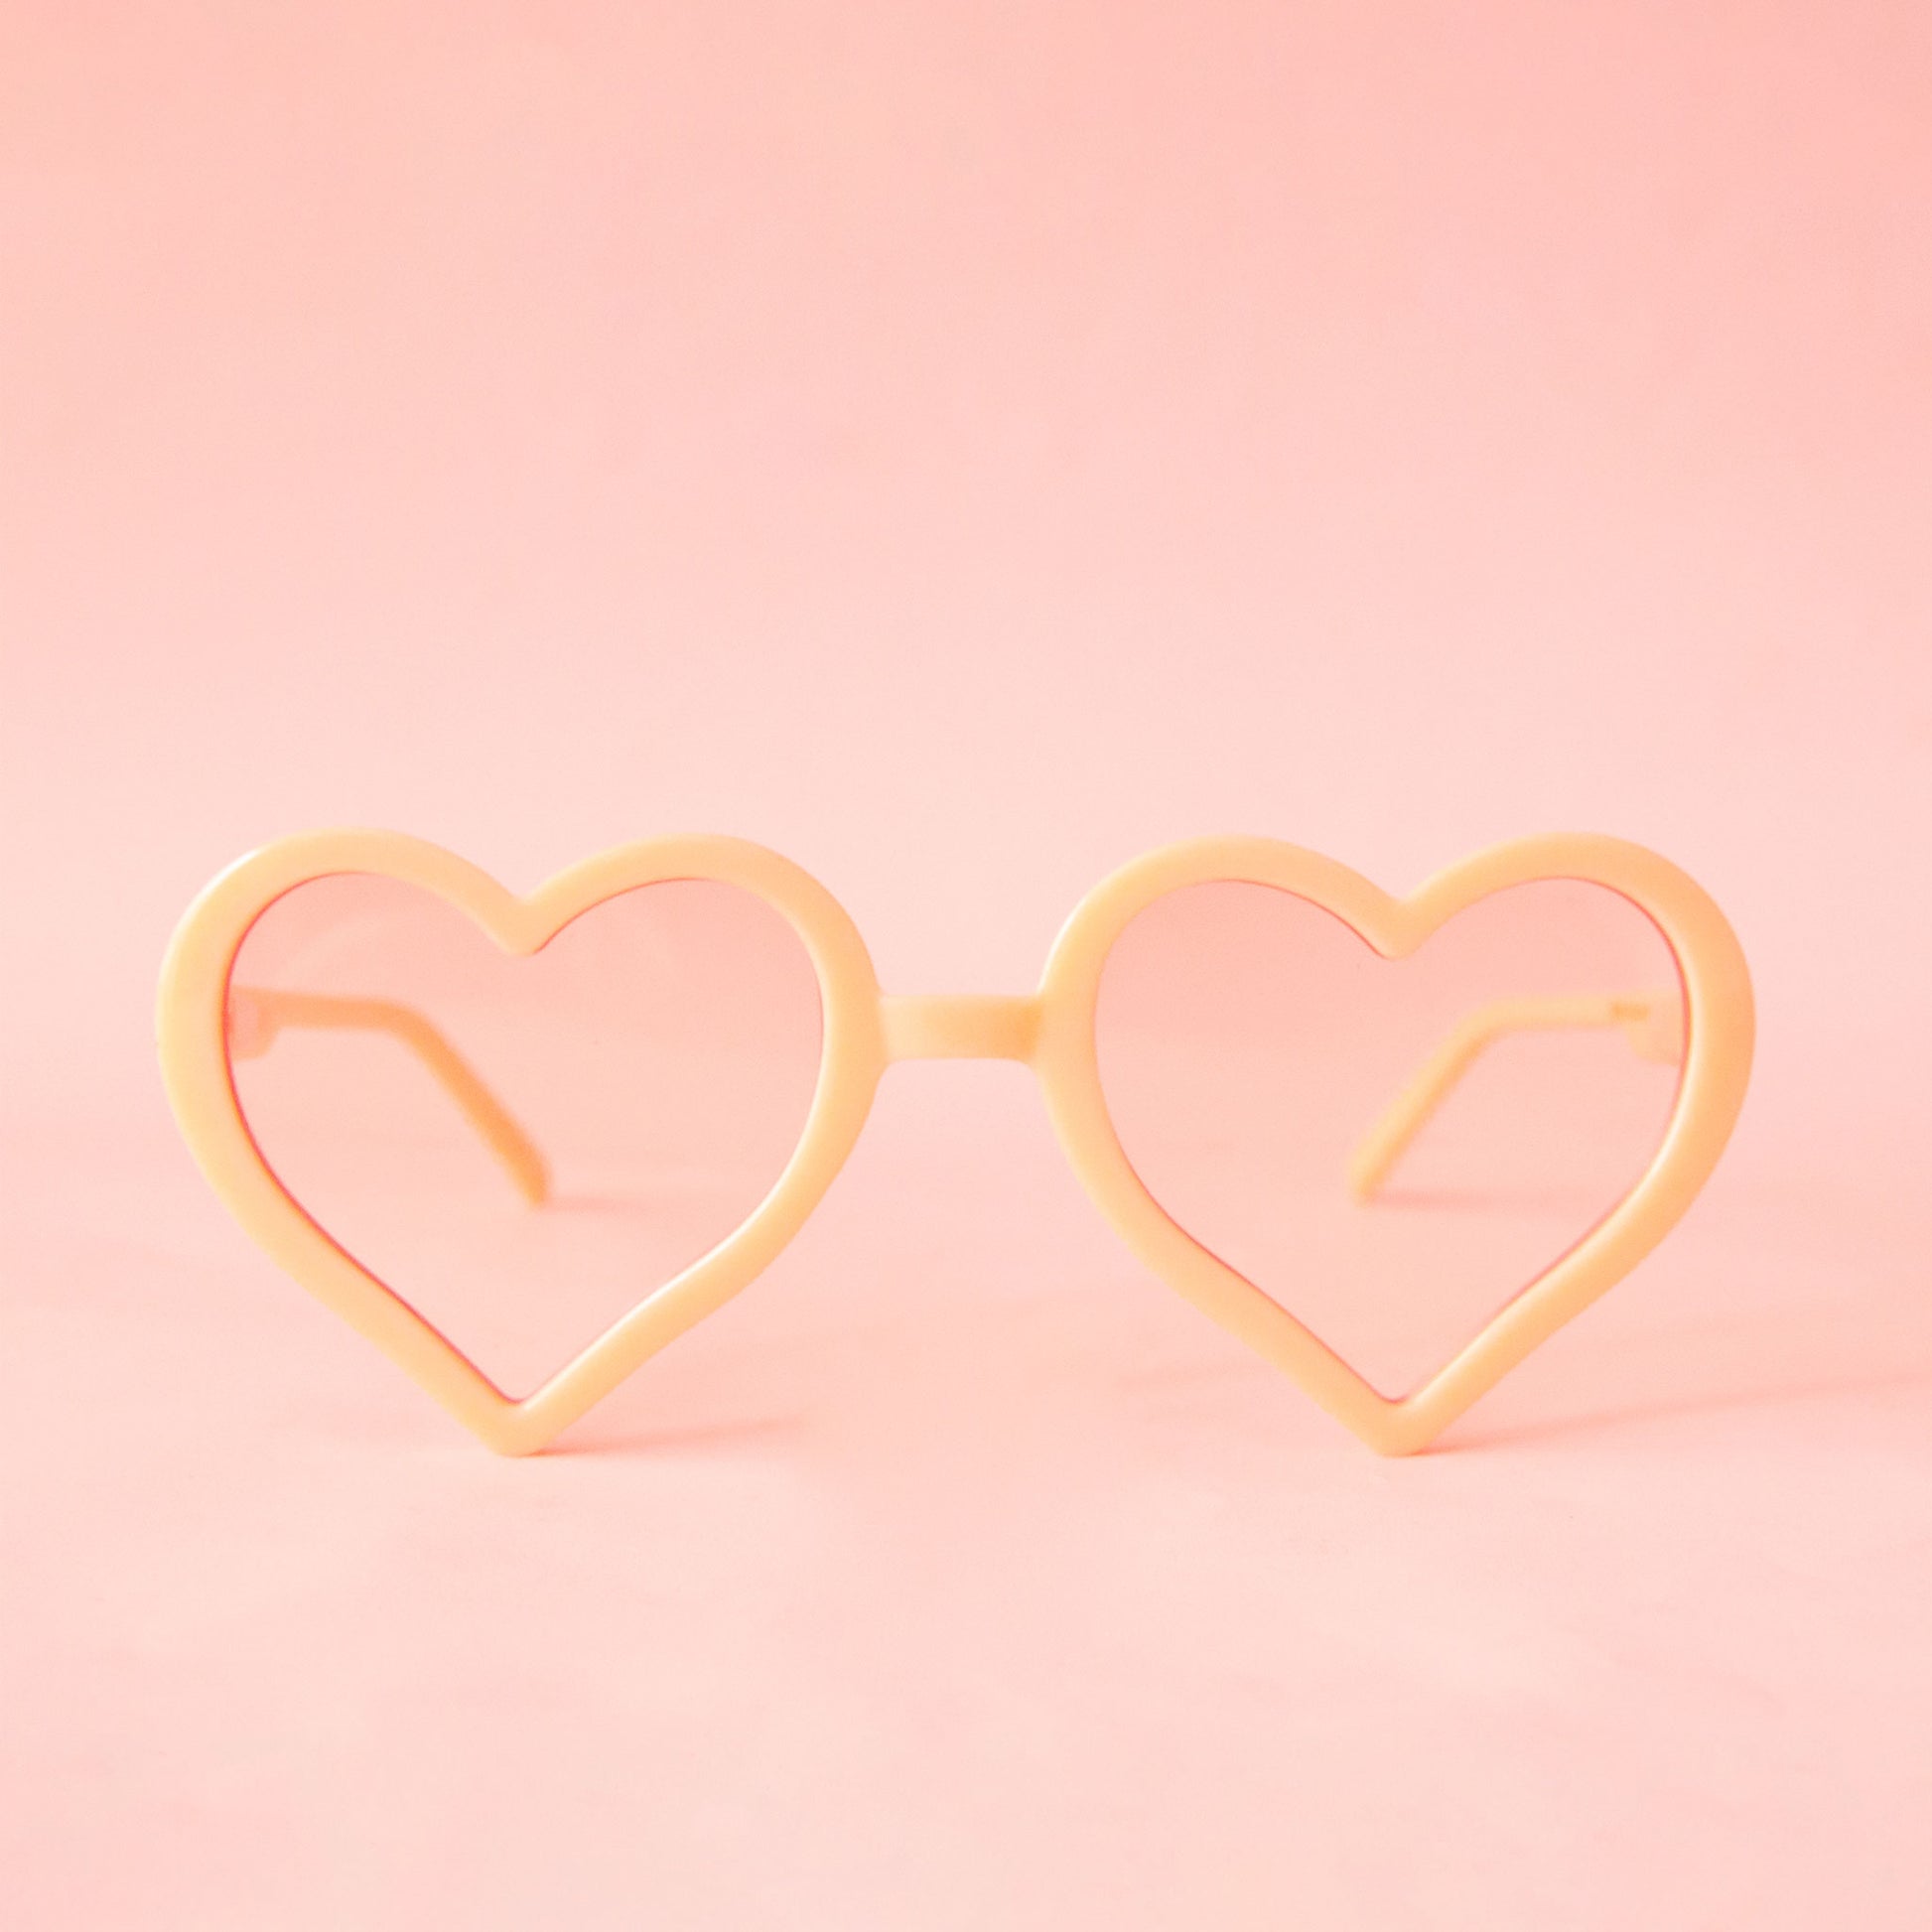 On a neutral background is a pair of apricot heart shaped glasses.